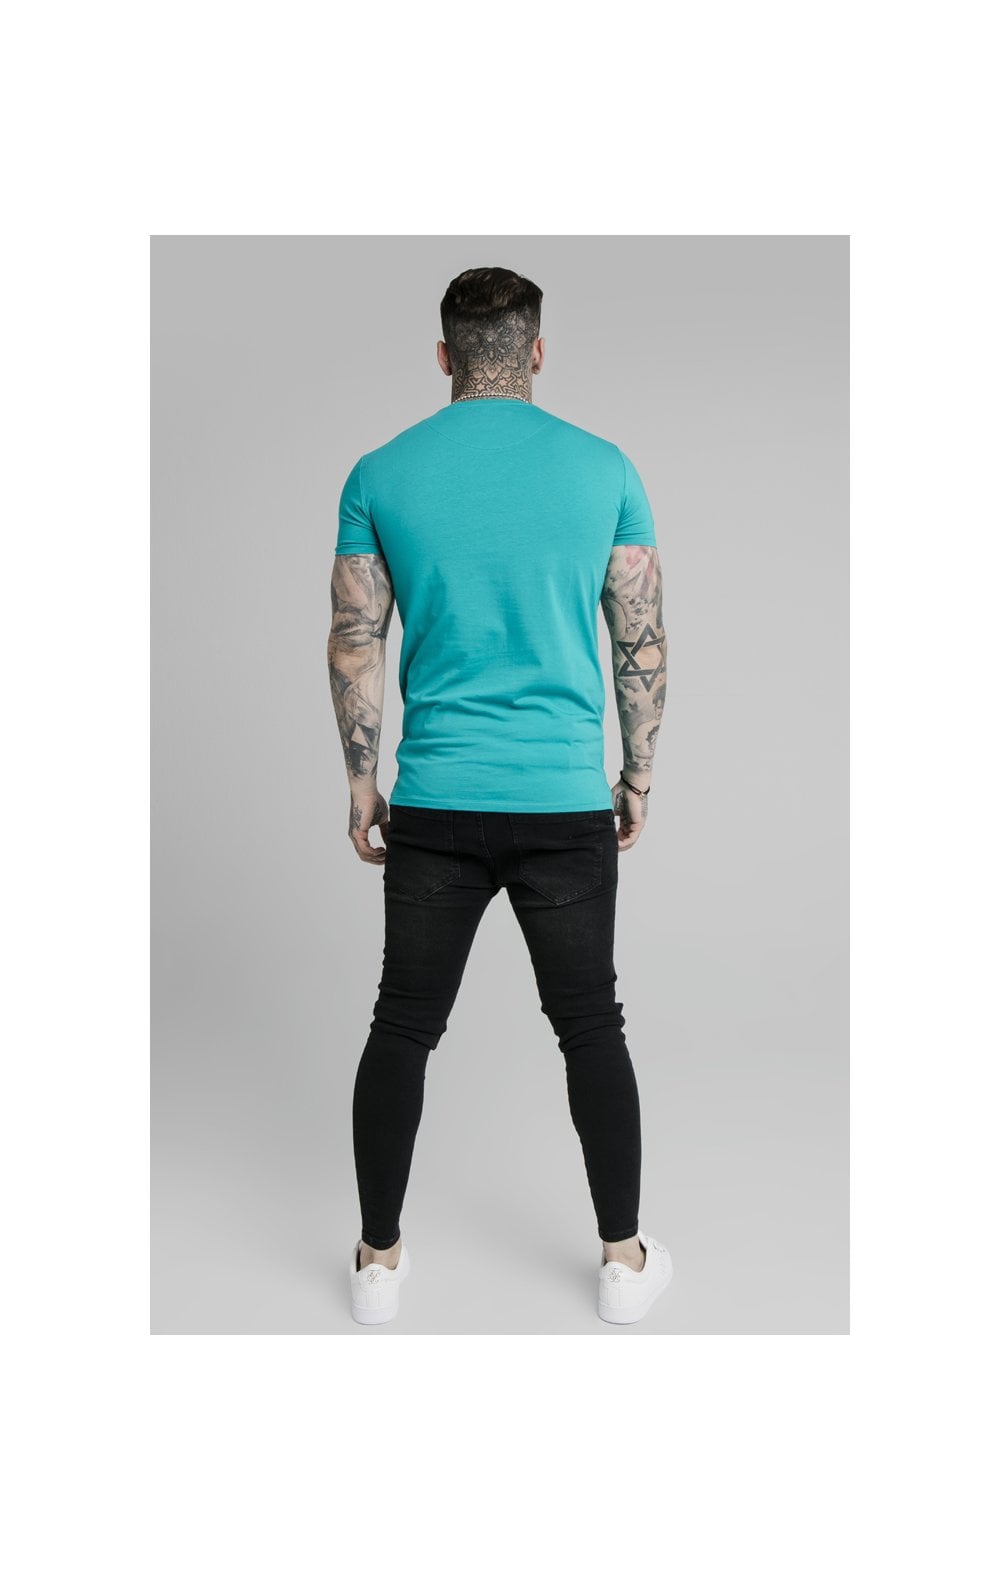 Load image into Gallery viewer, SikSilk S/S Azure Prestige Gym Tee - Teal (3)